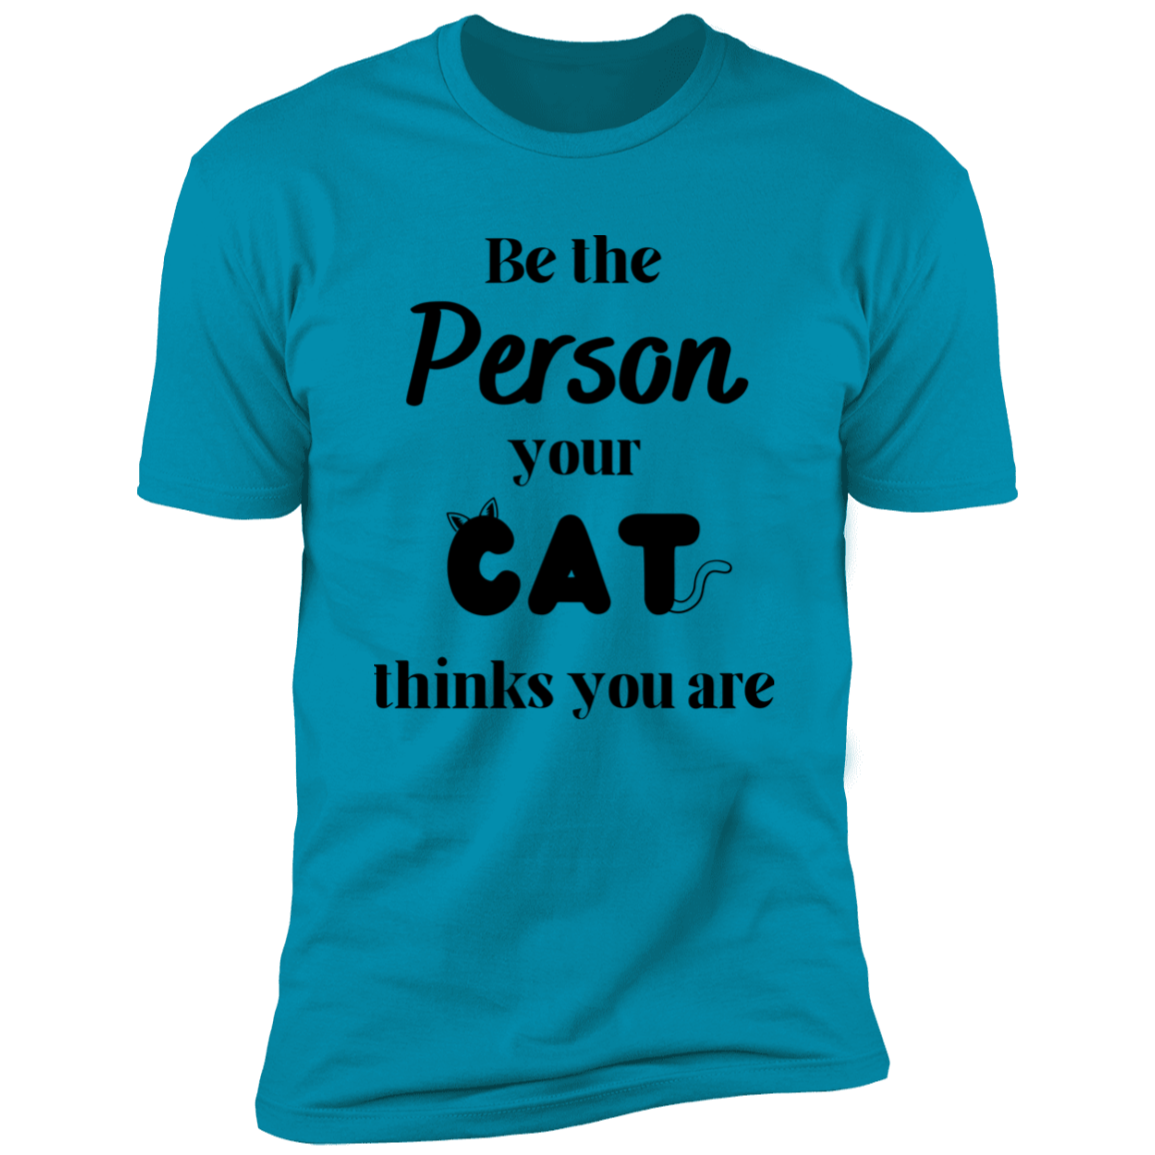 Be the Person Your Cat Thinks You Are T-shirt, Cat Shirt for humans, in turquoise